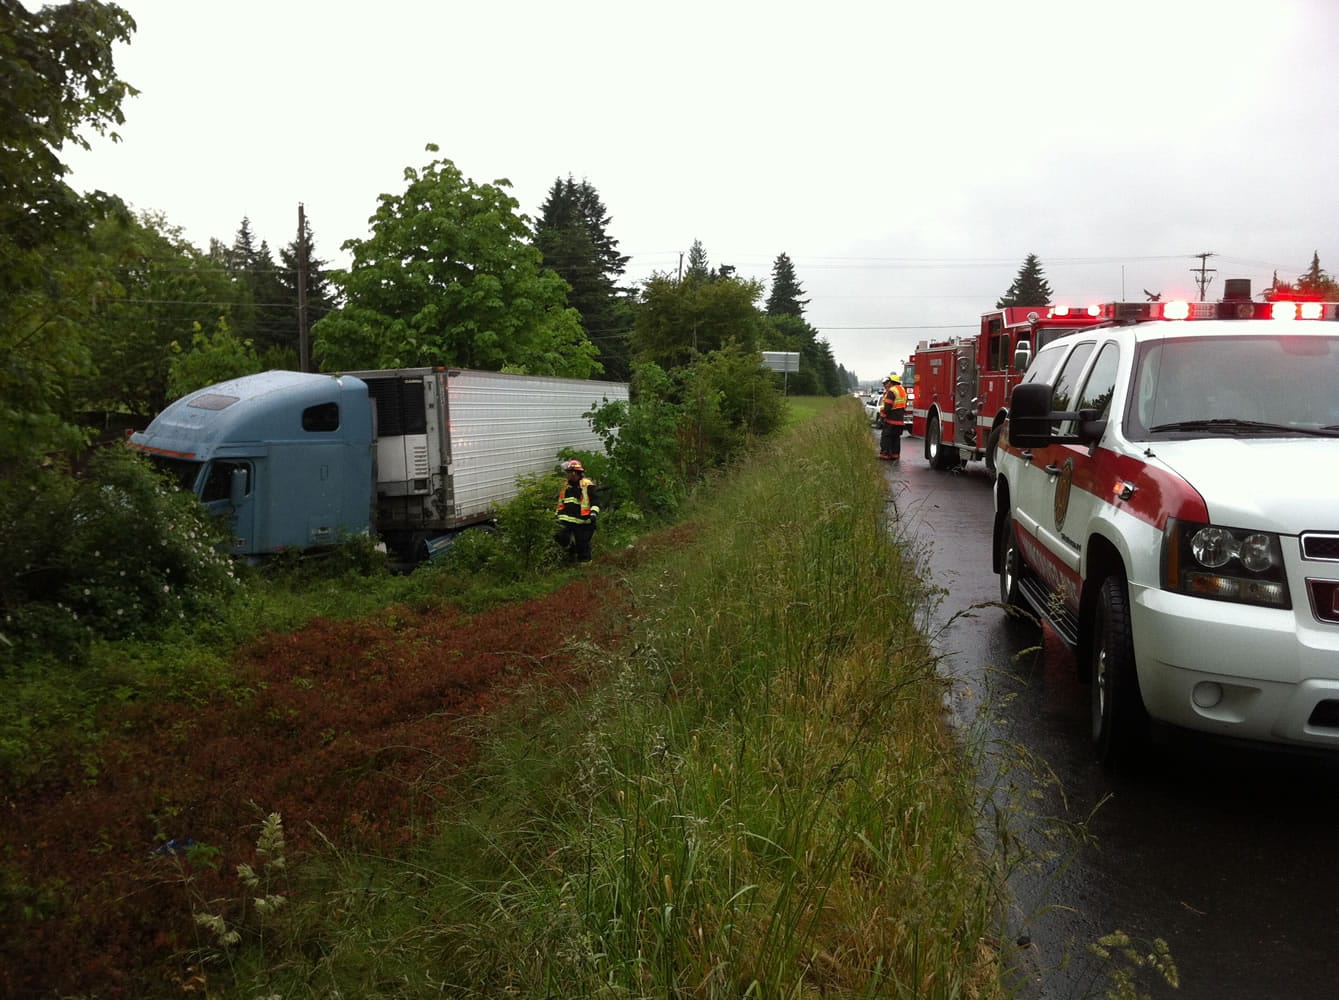 Vancouver firefighters responded Thursday morning after a tractor-trailer rig skidded off eastbound Highway 14 near the Southeast 164th Avenue exit.